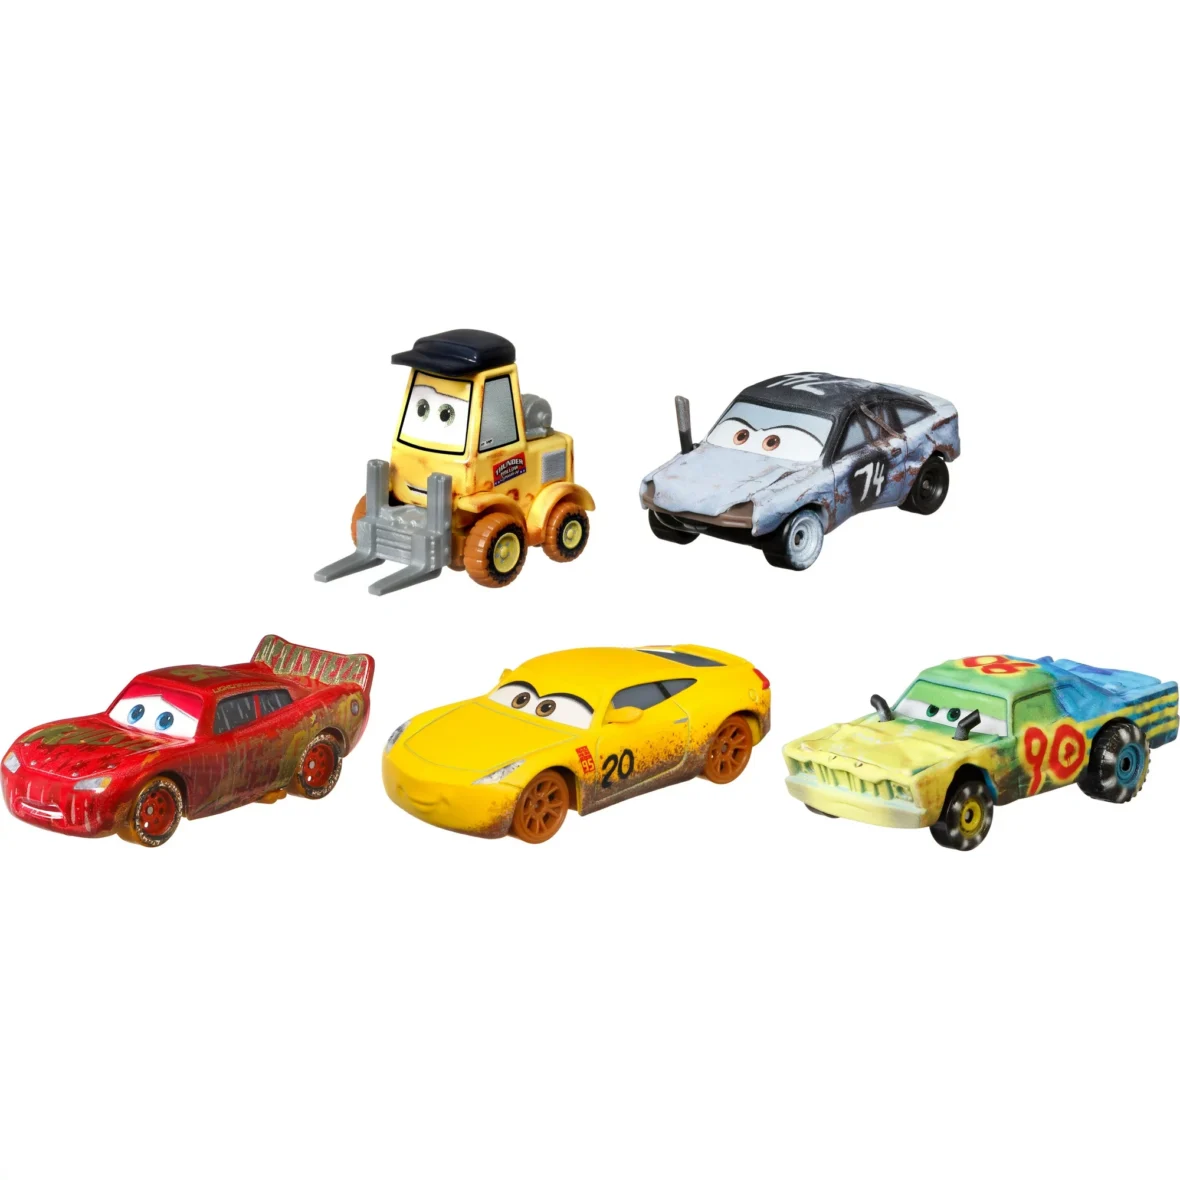 Disney and Pixar Cars 3 Vehicle 5-Pack of Toy Cars, Thunder Hollow Race